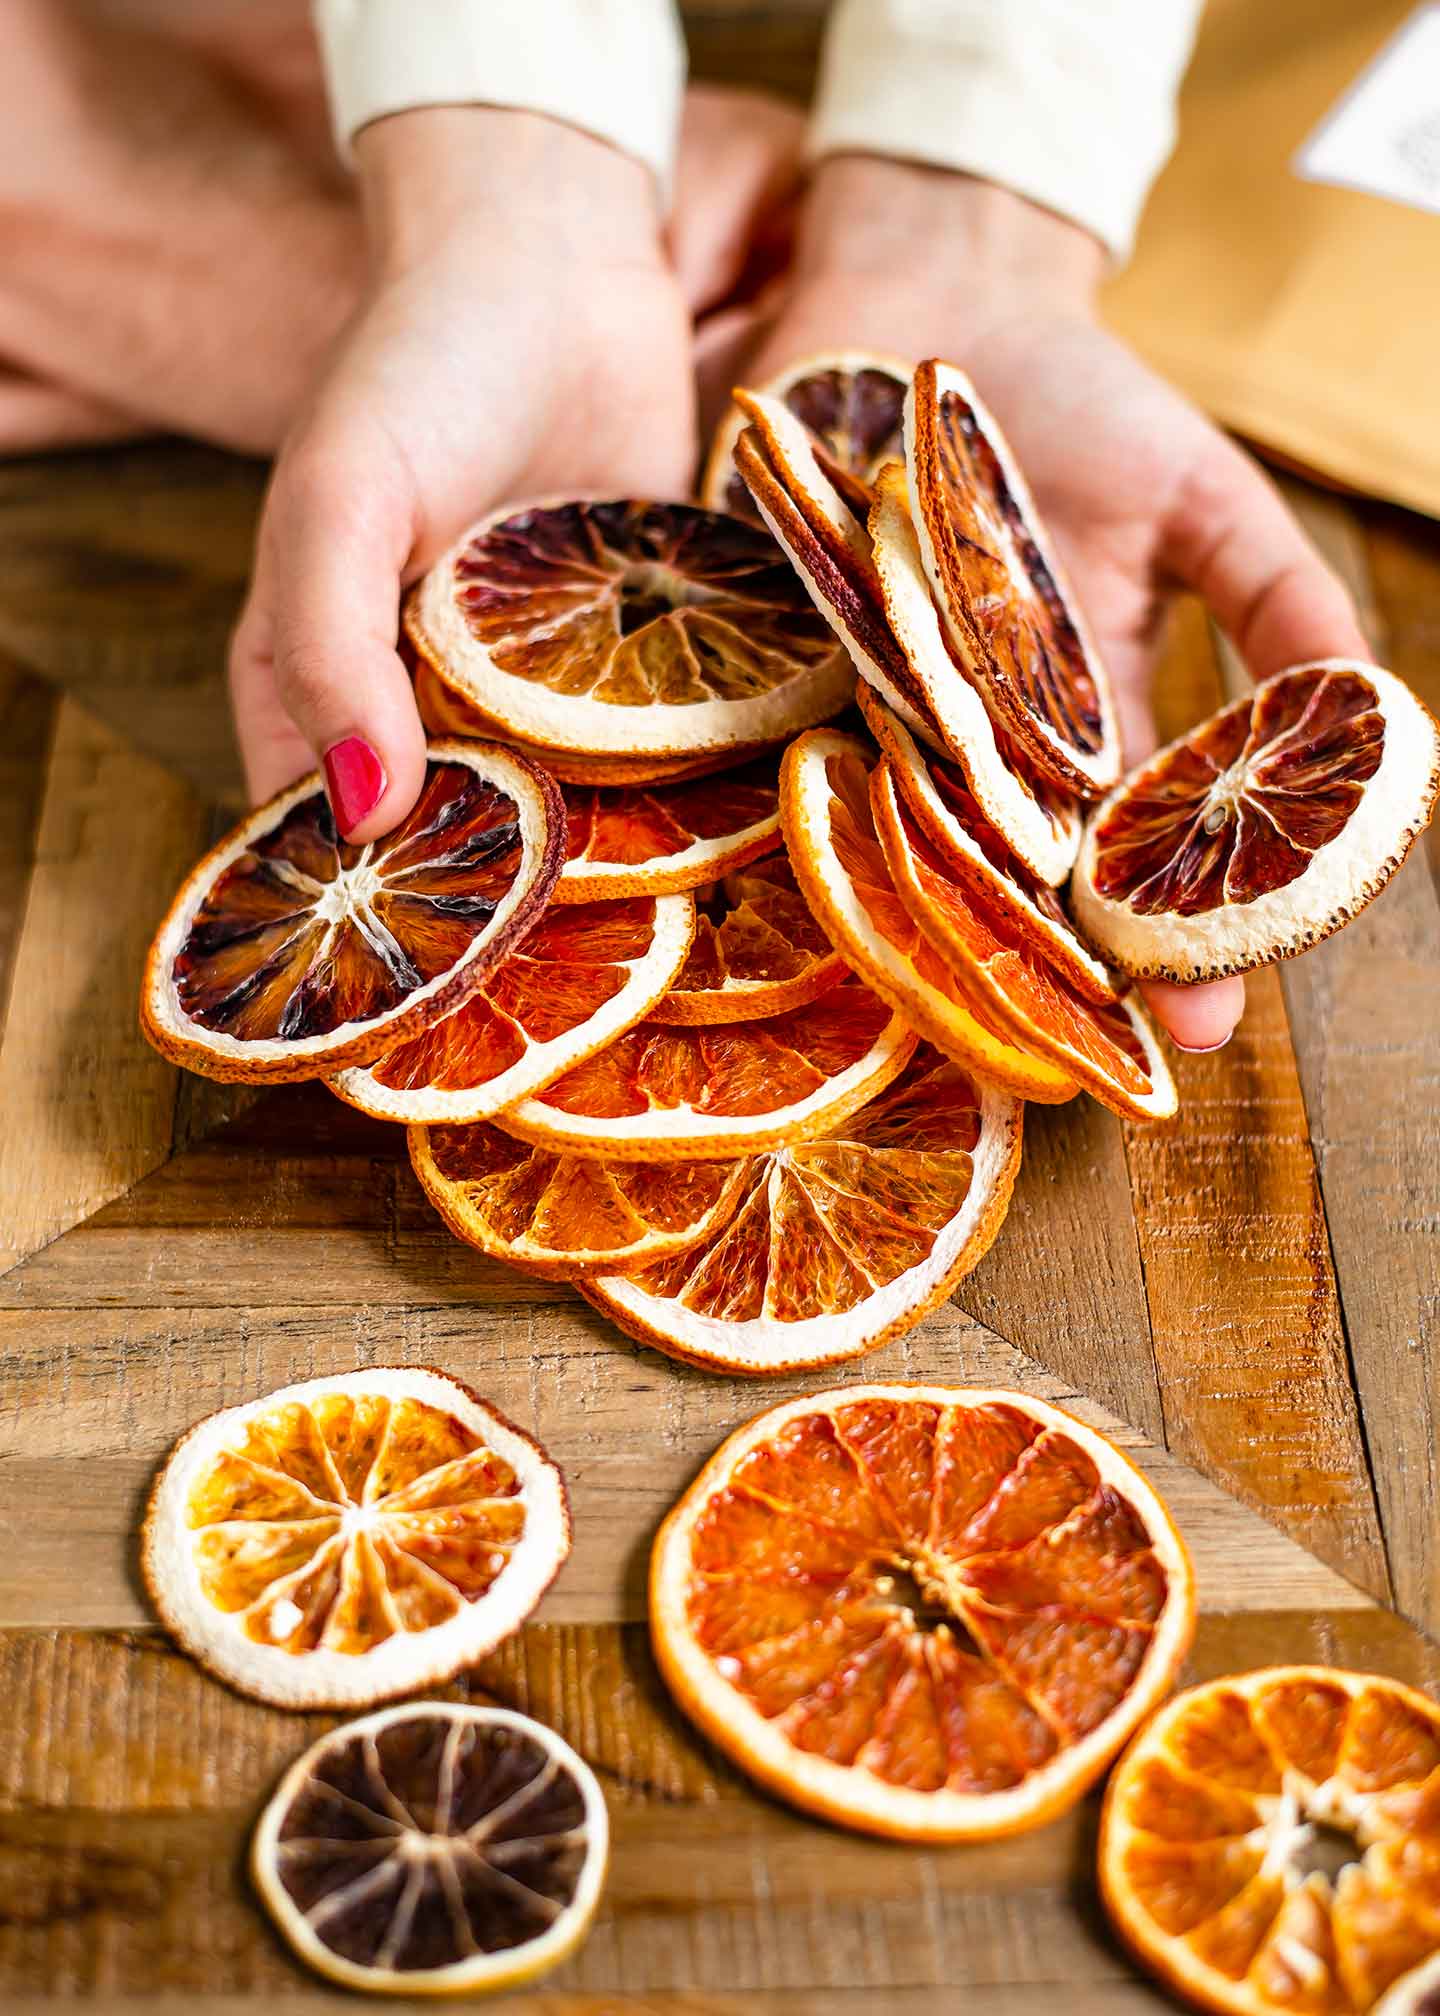 Top down view of sliced and dried citrus fruit spilling out of two hands and on to a wooden table. The dried fruit are different shades of red and orange and varying sizes.